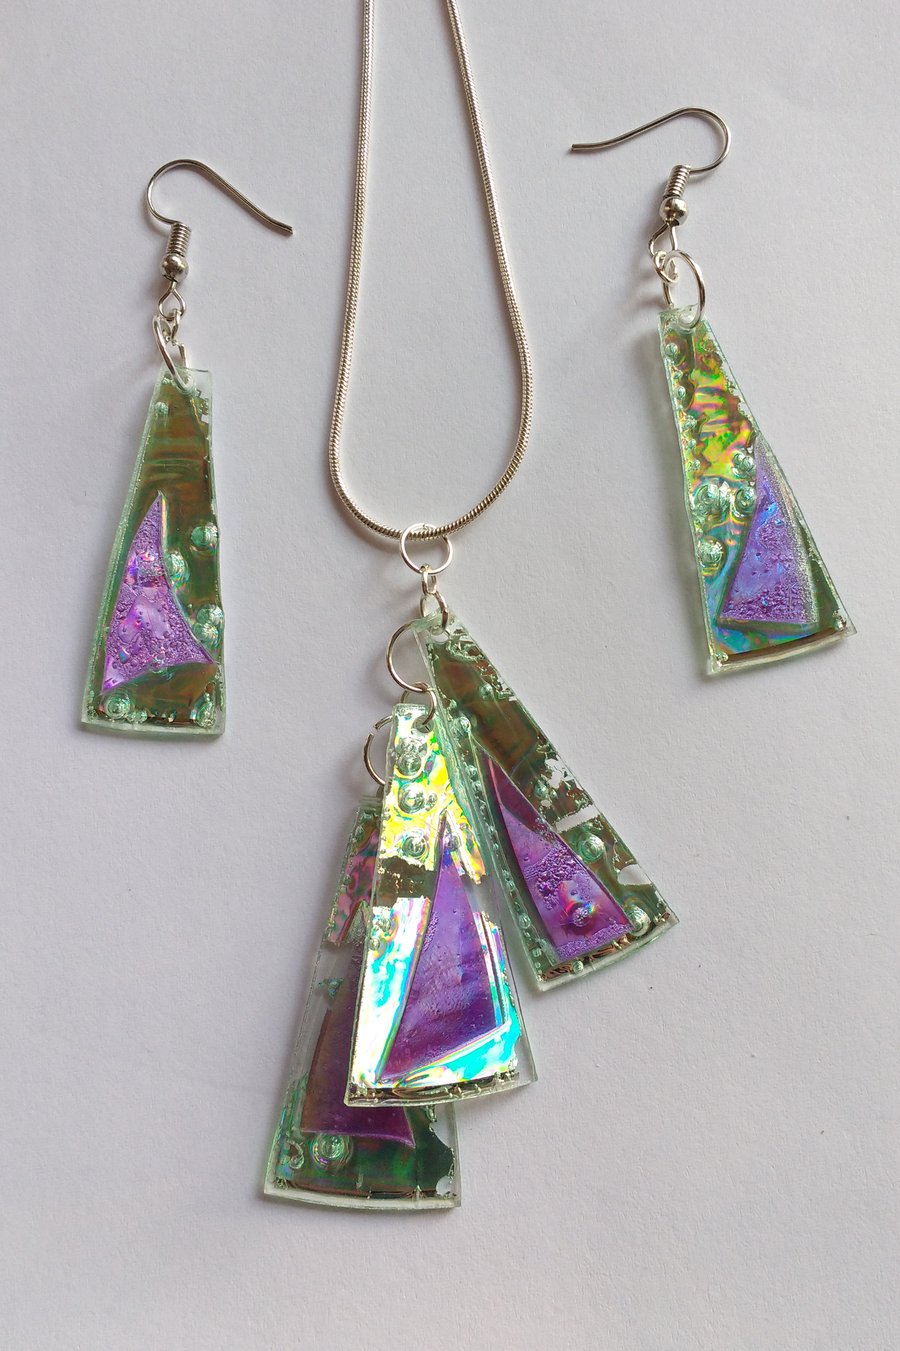 Matched set of earrings and pendant.